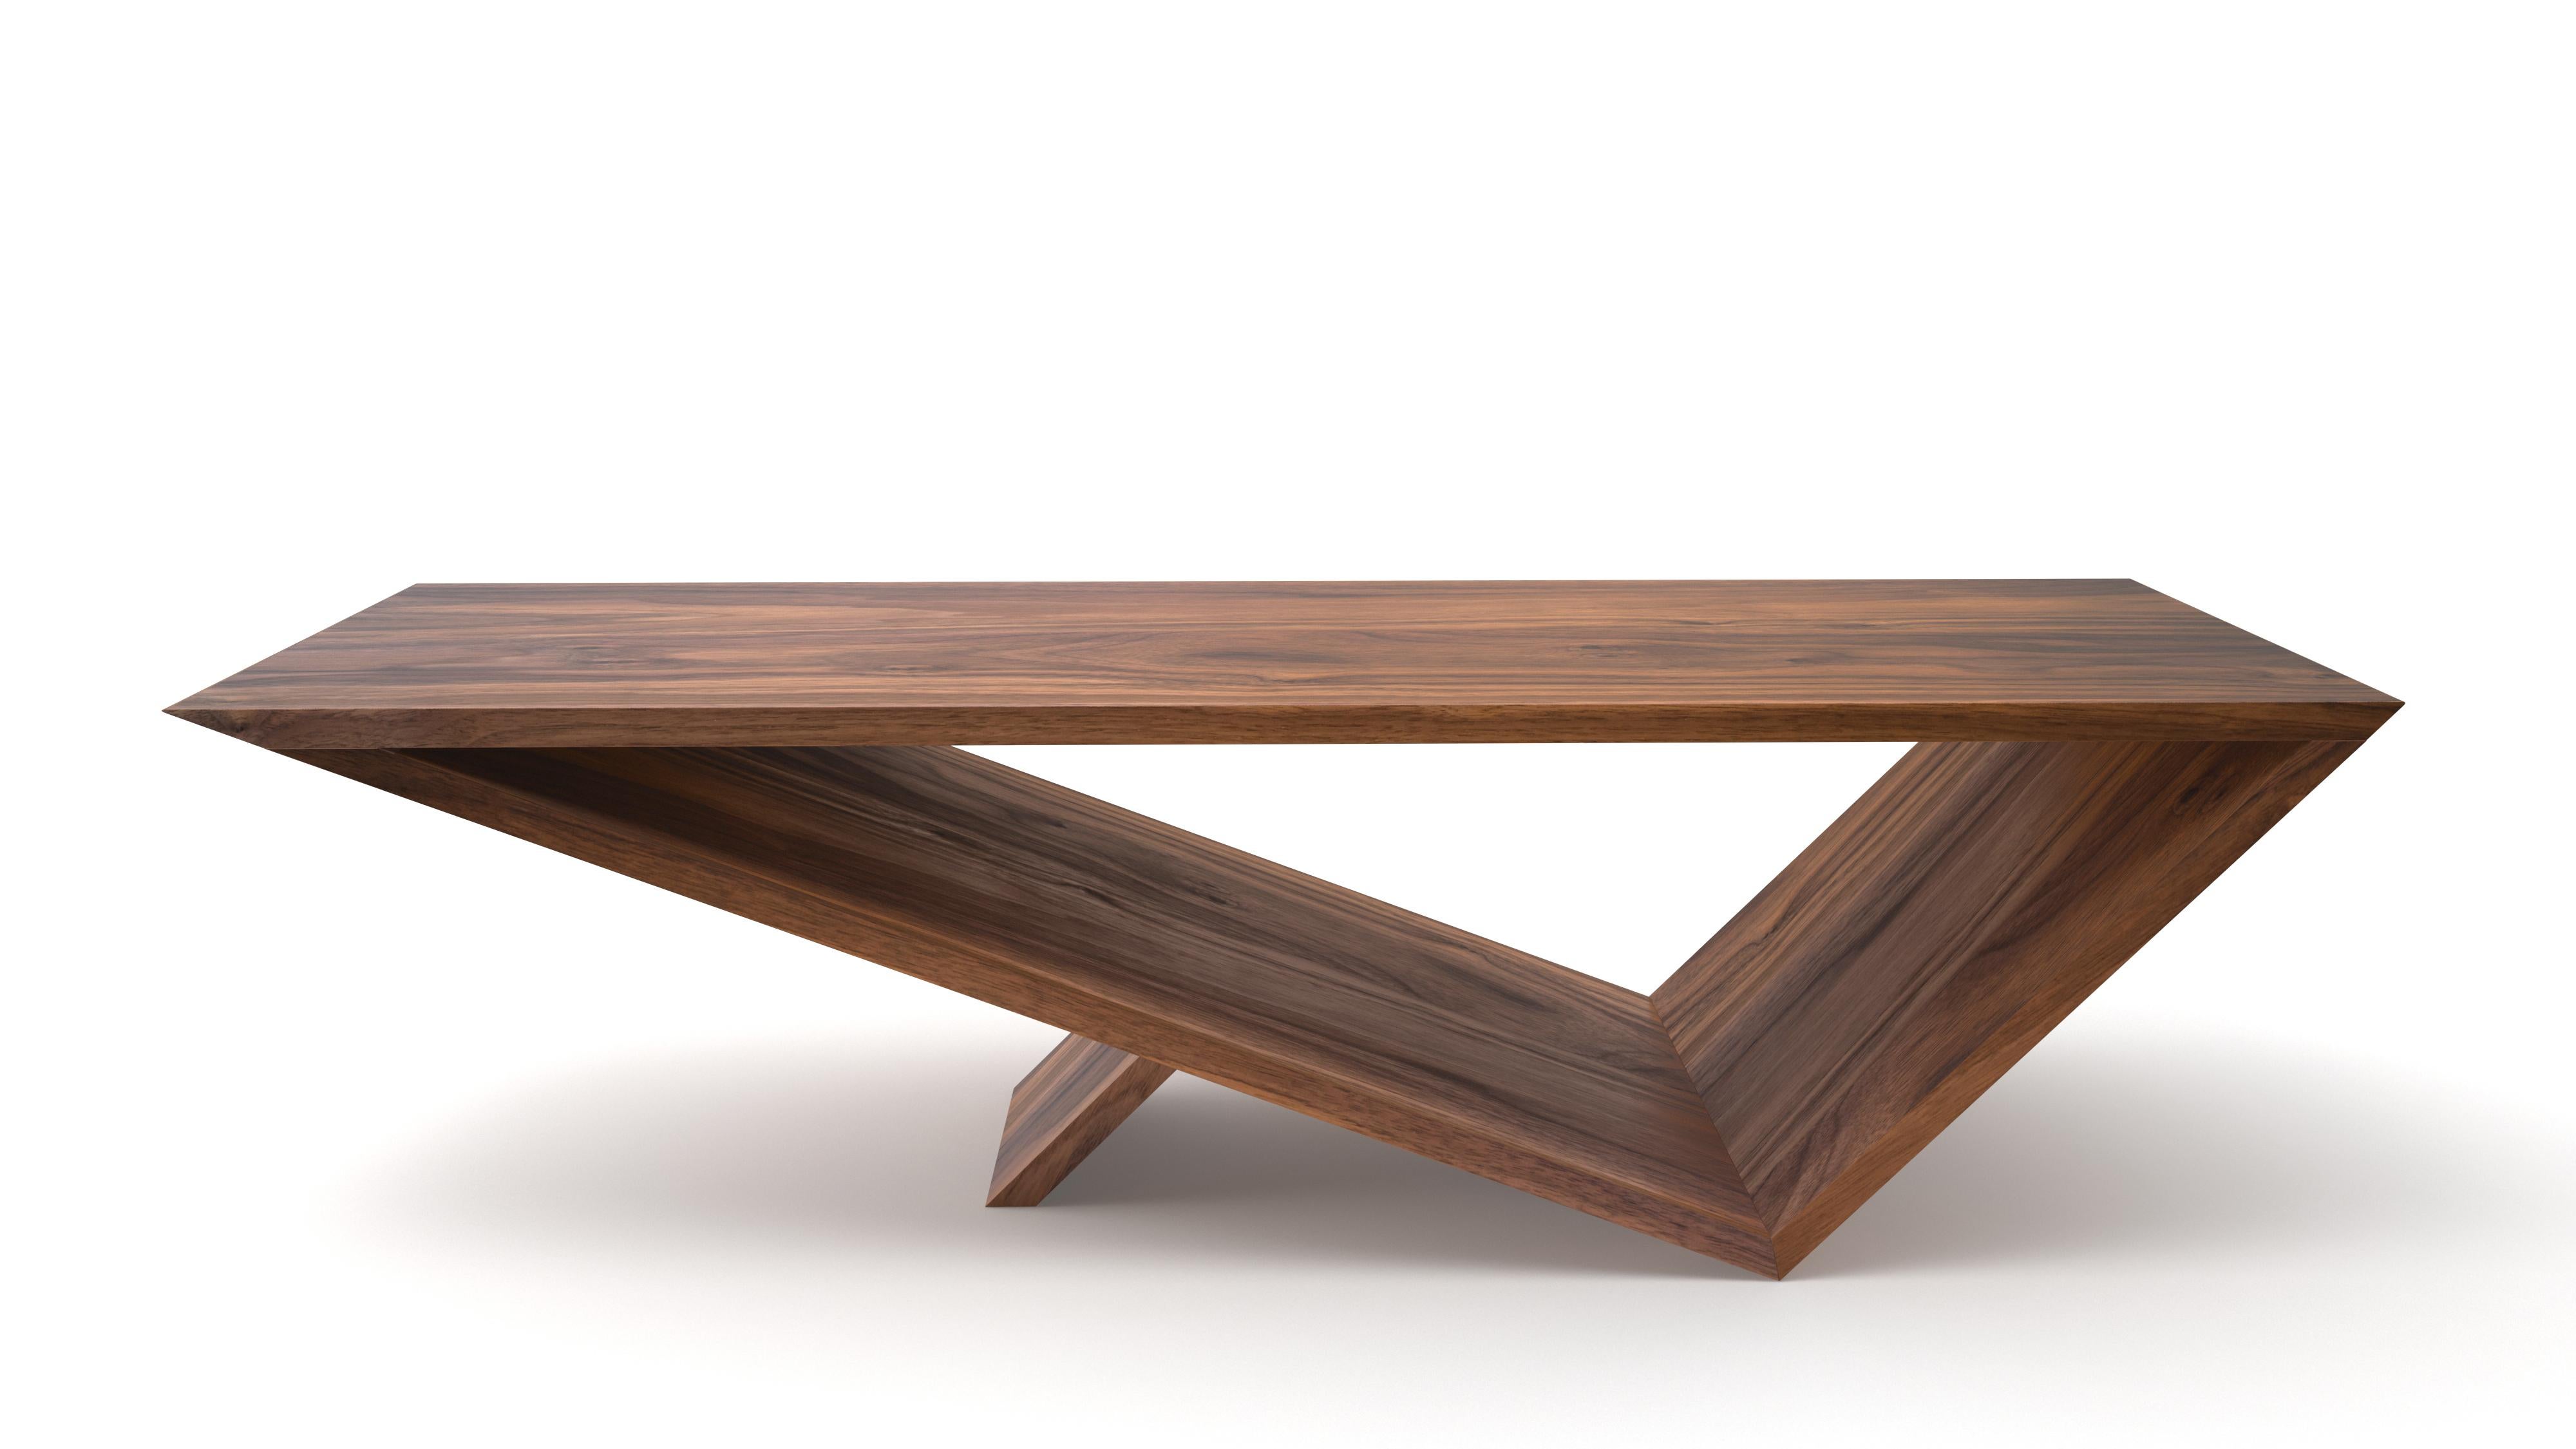 Time/space Portal Coffee Table in Walnut by Neal Aronowitz Design
Dimensions: D 167.7 x W 63.5 x H 45.7 cm
Materials: Walnut.
This table can also be made in other hardwoods. P

The inspiration for the Time/Space Portal Table collection comes